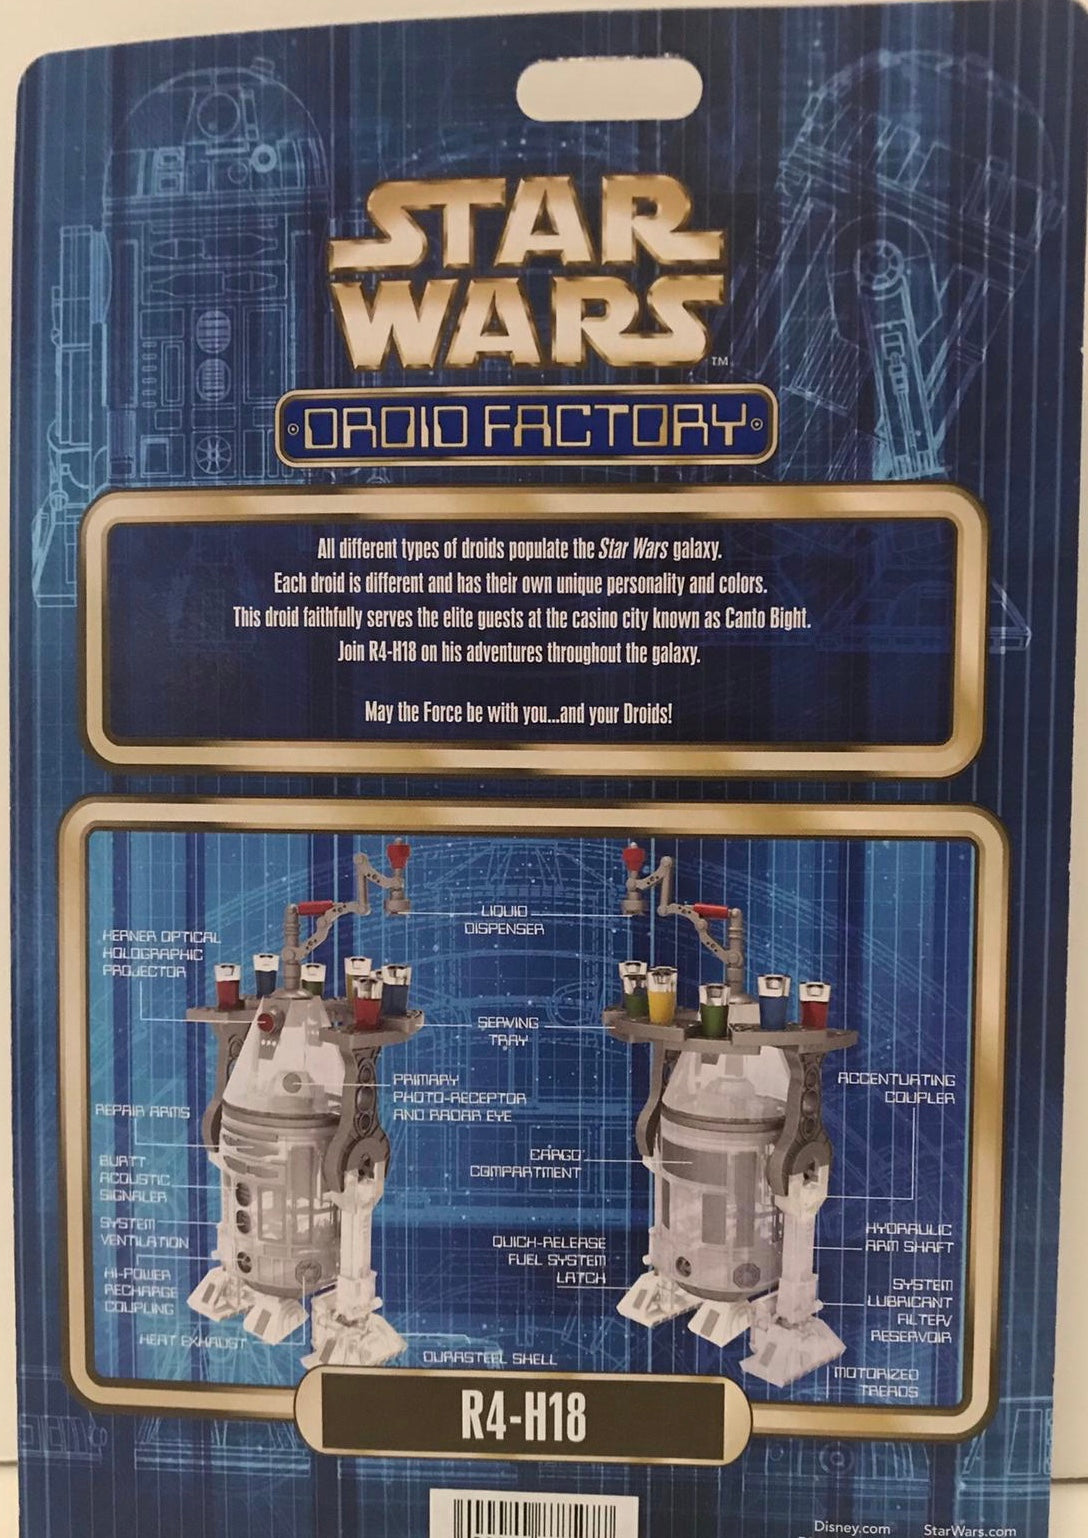 Disney Parks Star Wars R4-H18 Droid Factory Holiday New with Box